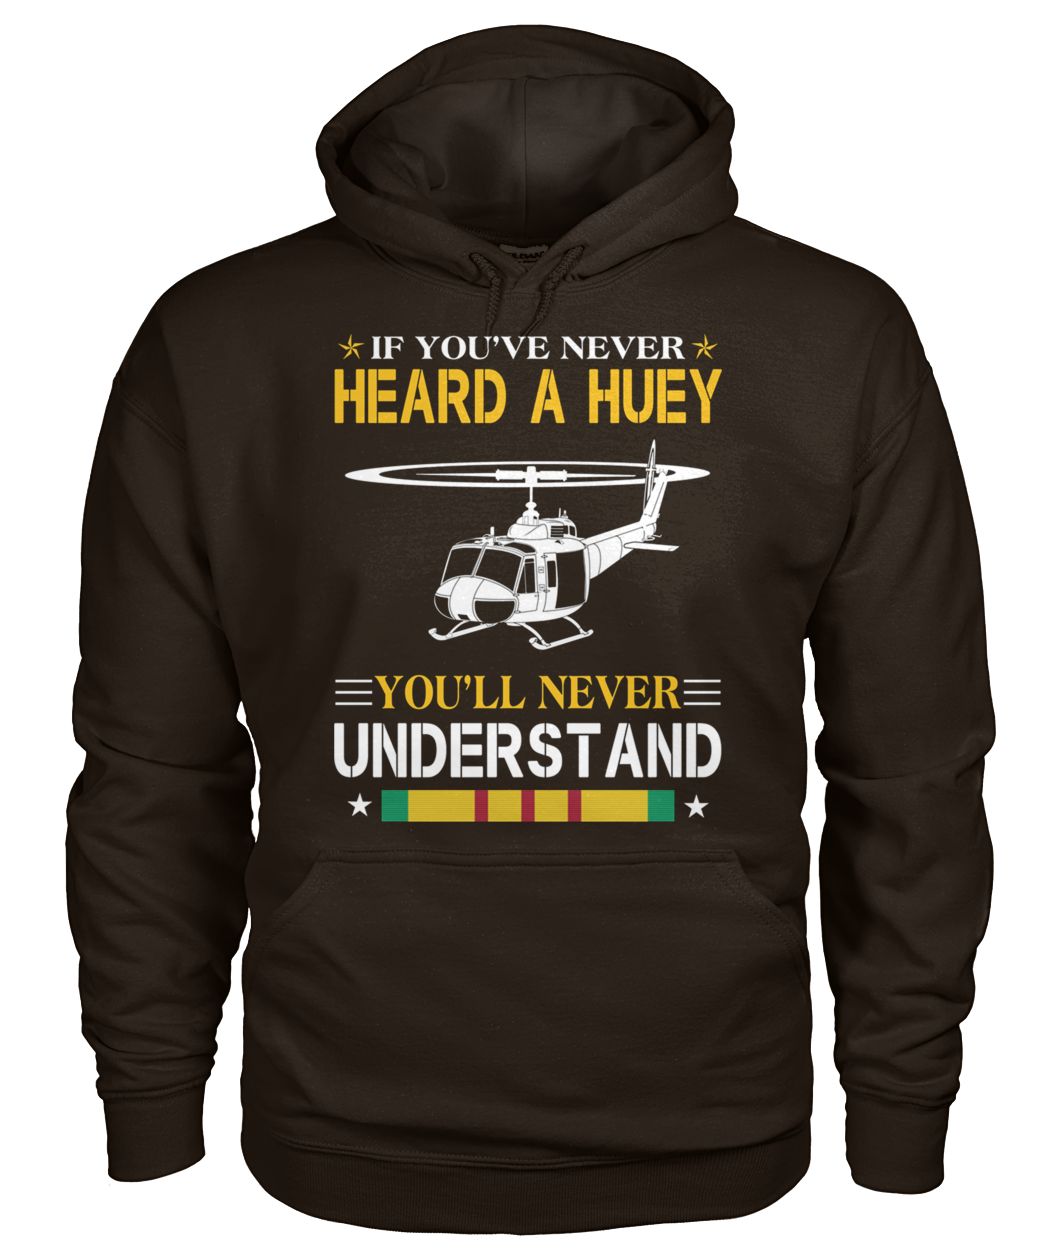 Air force if you've never heard a huey you'll never understand hoodie